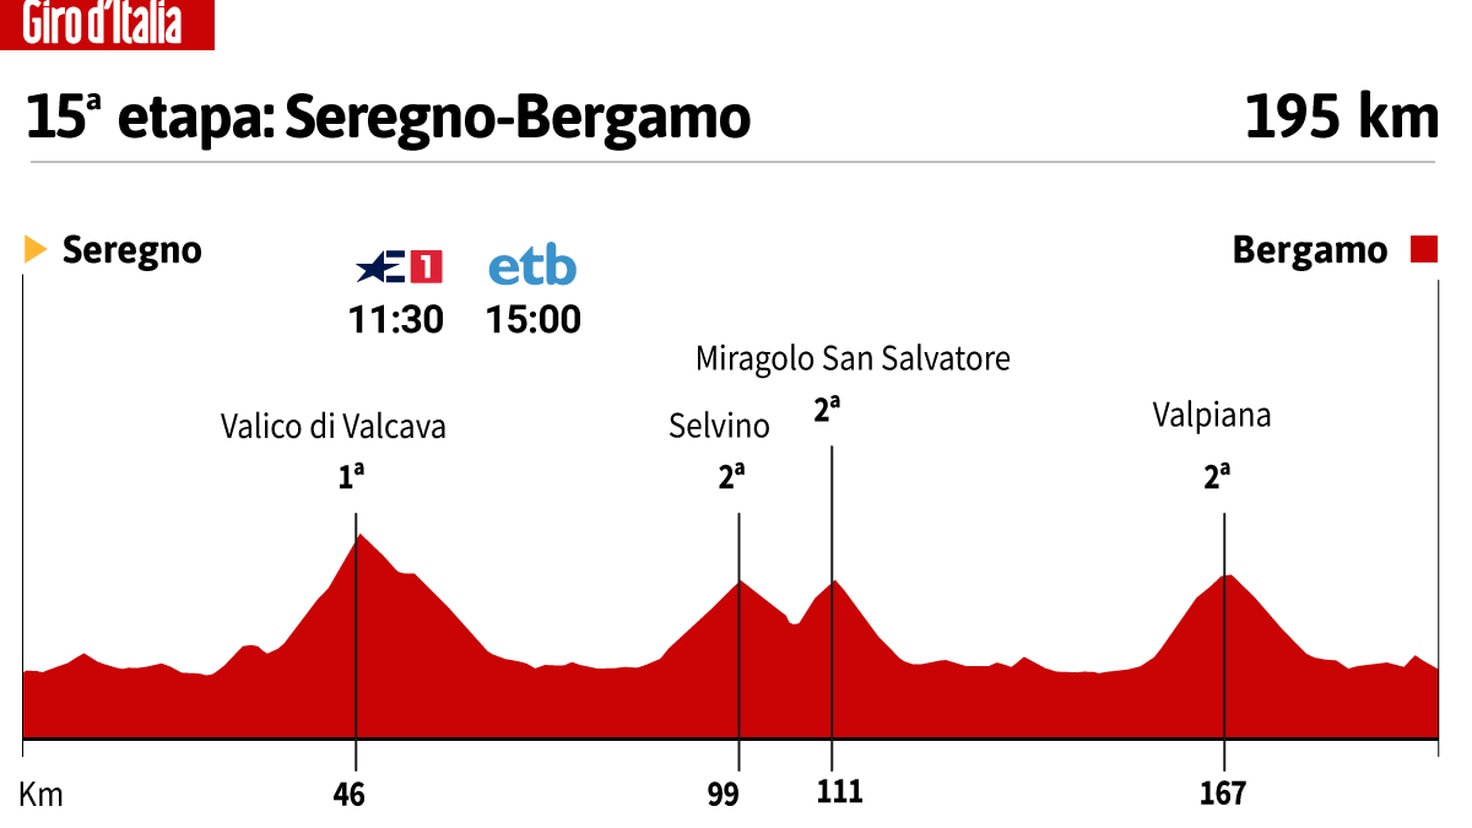 Giro d'Italia today, stage 15: schedule, profile and route
